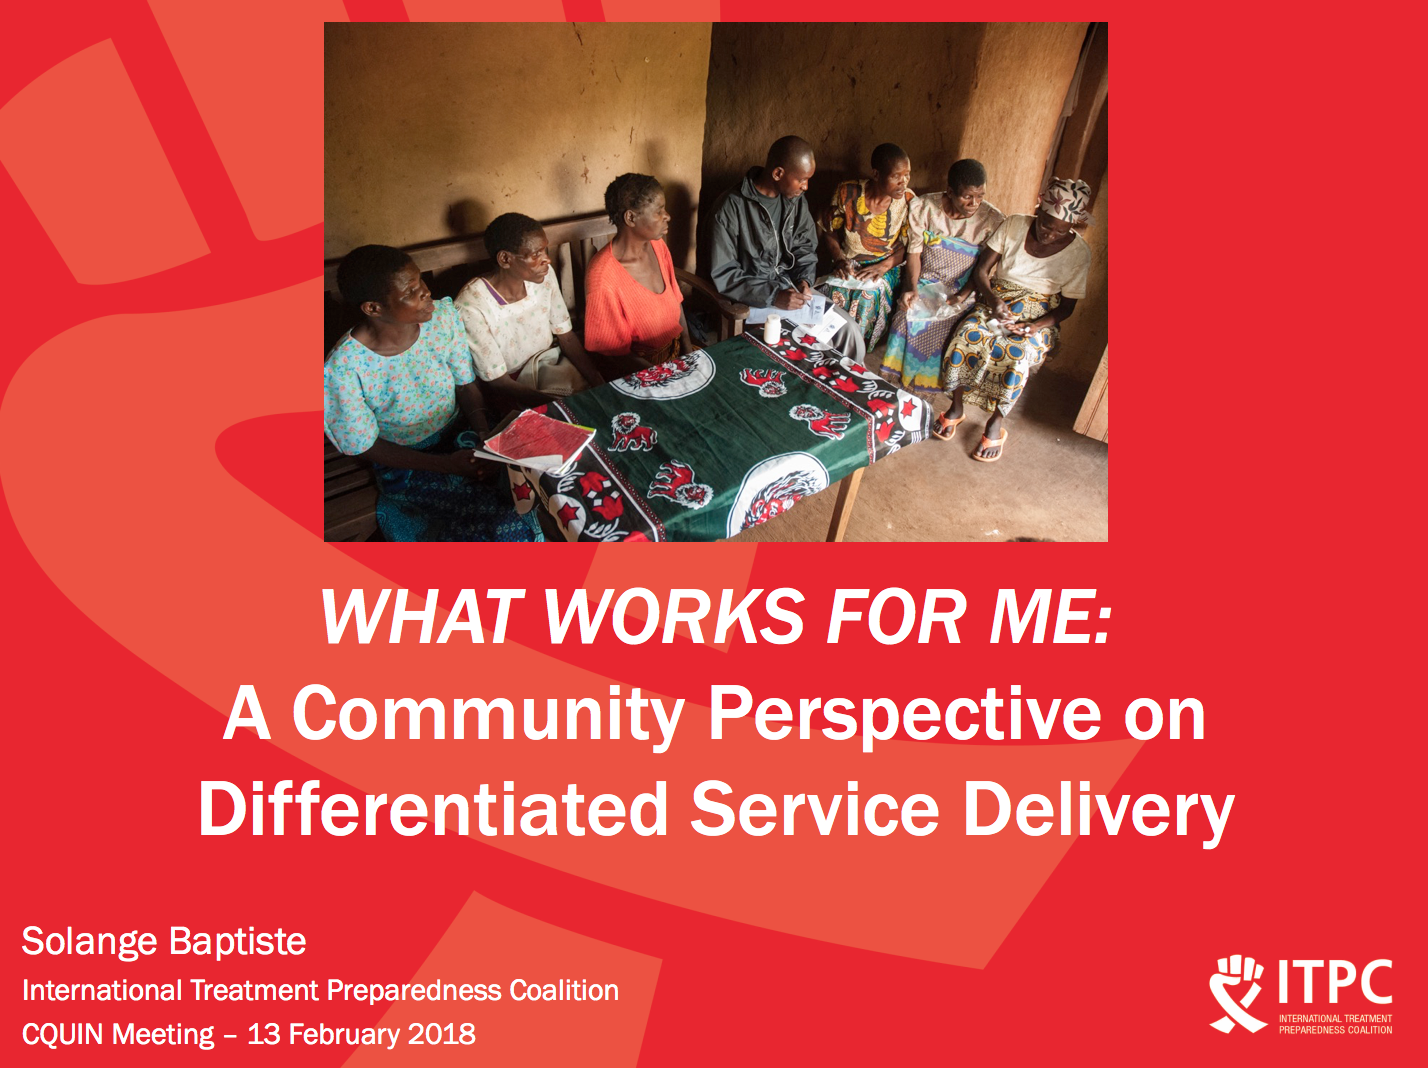 Community Perspective on Differentiated Service Delivery